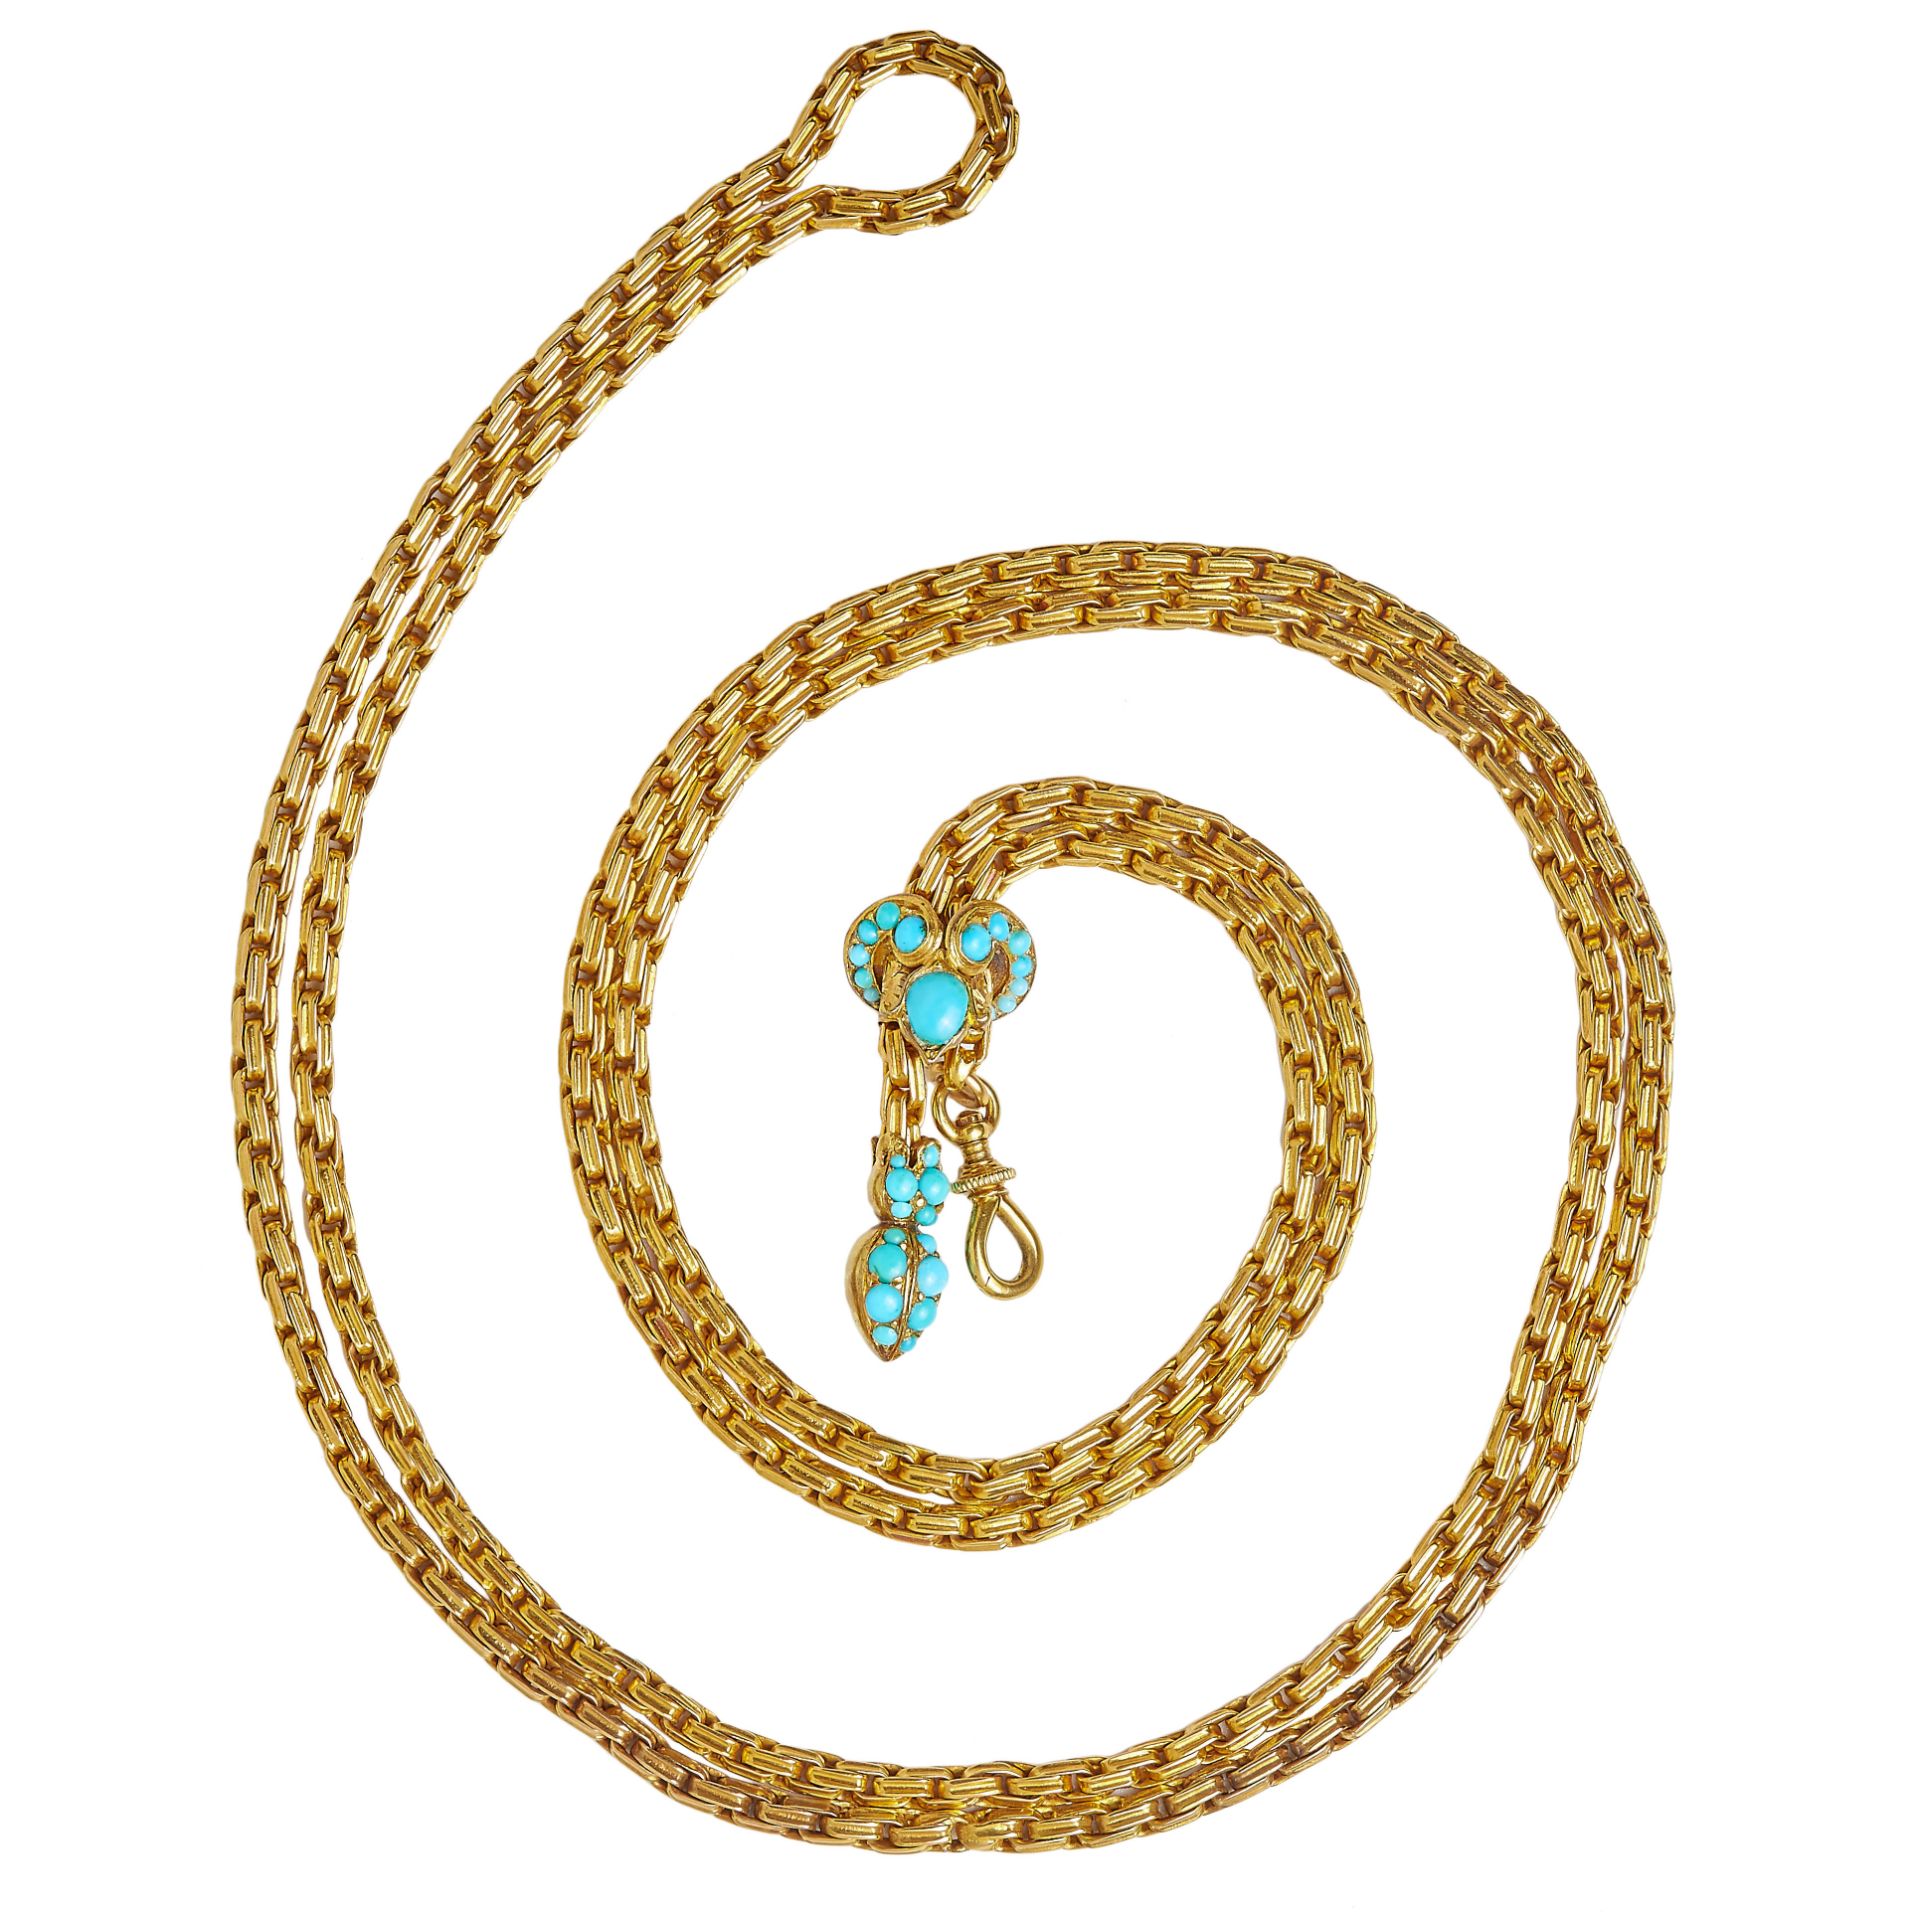 VICTORIAN GUARD CHAIN NECKLACE WITH TURQUOISE SLIDER